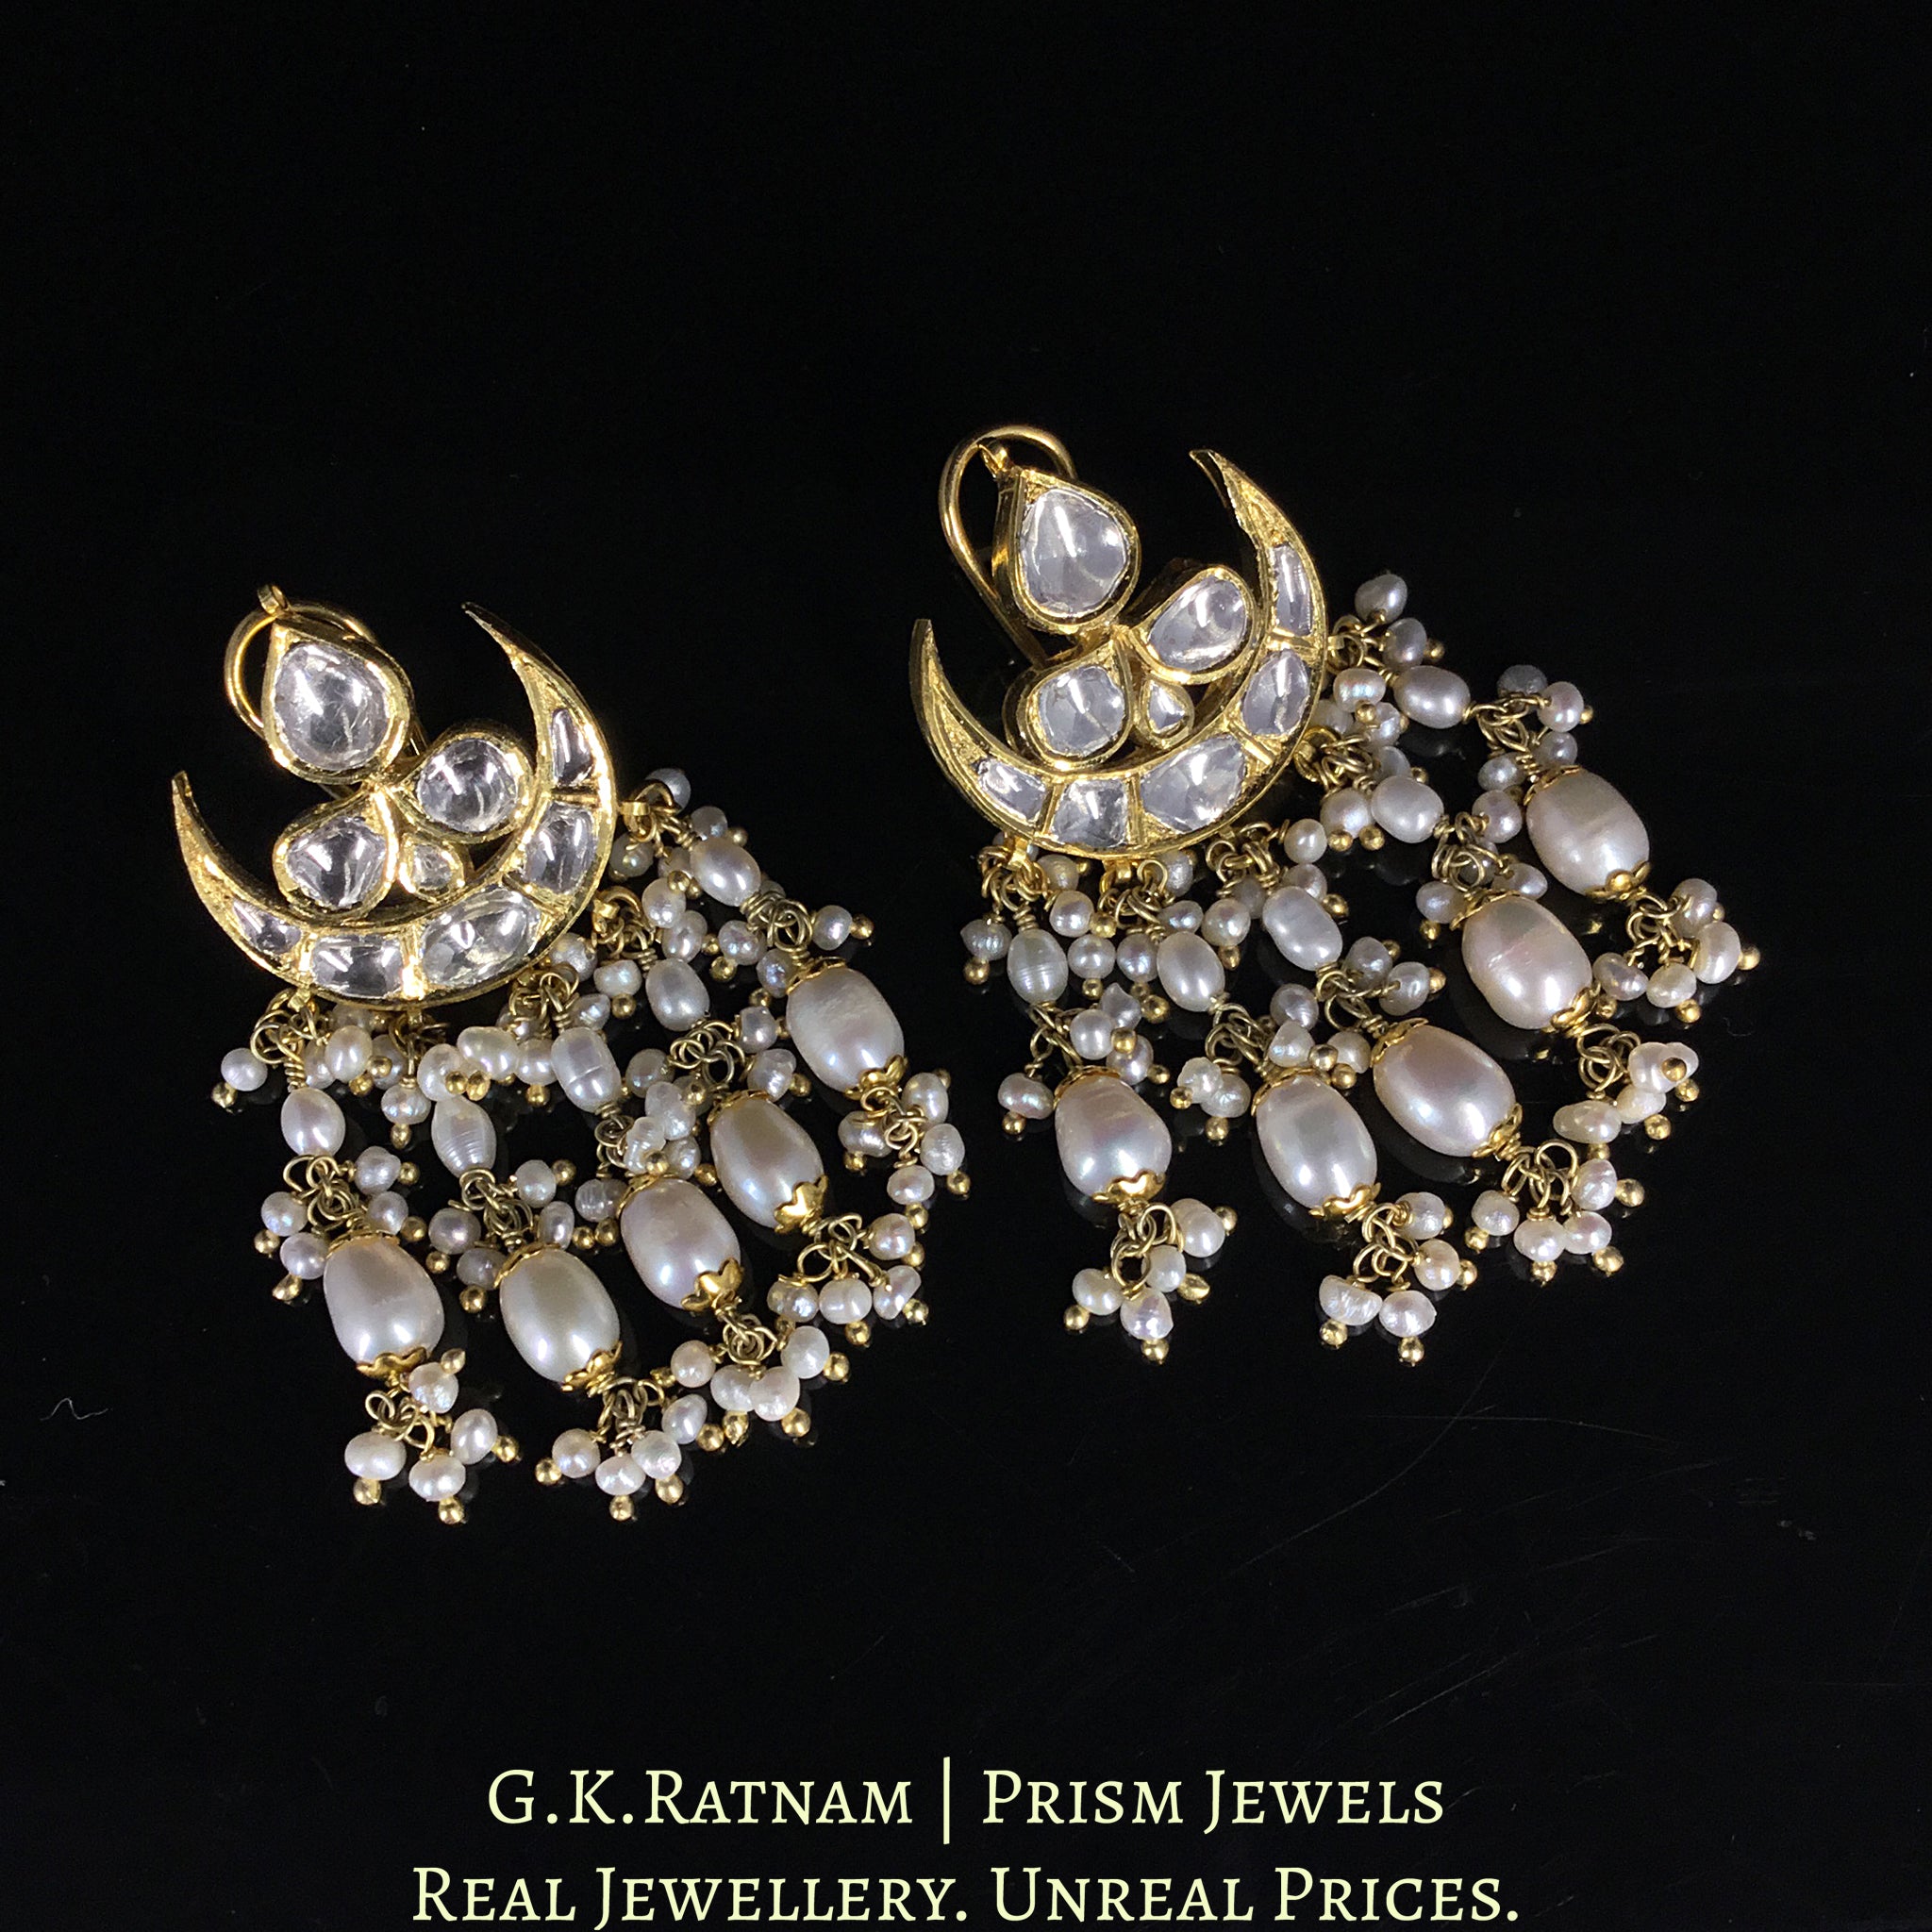 18k Gold and Diamond Polki chand-shaped Karanphool Earring Pair With Natural Freshwater Pearls